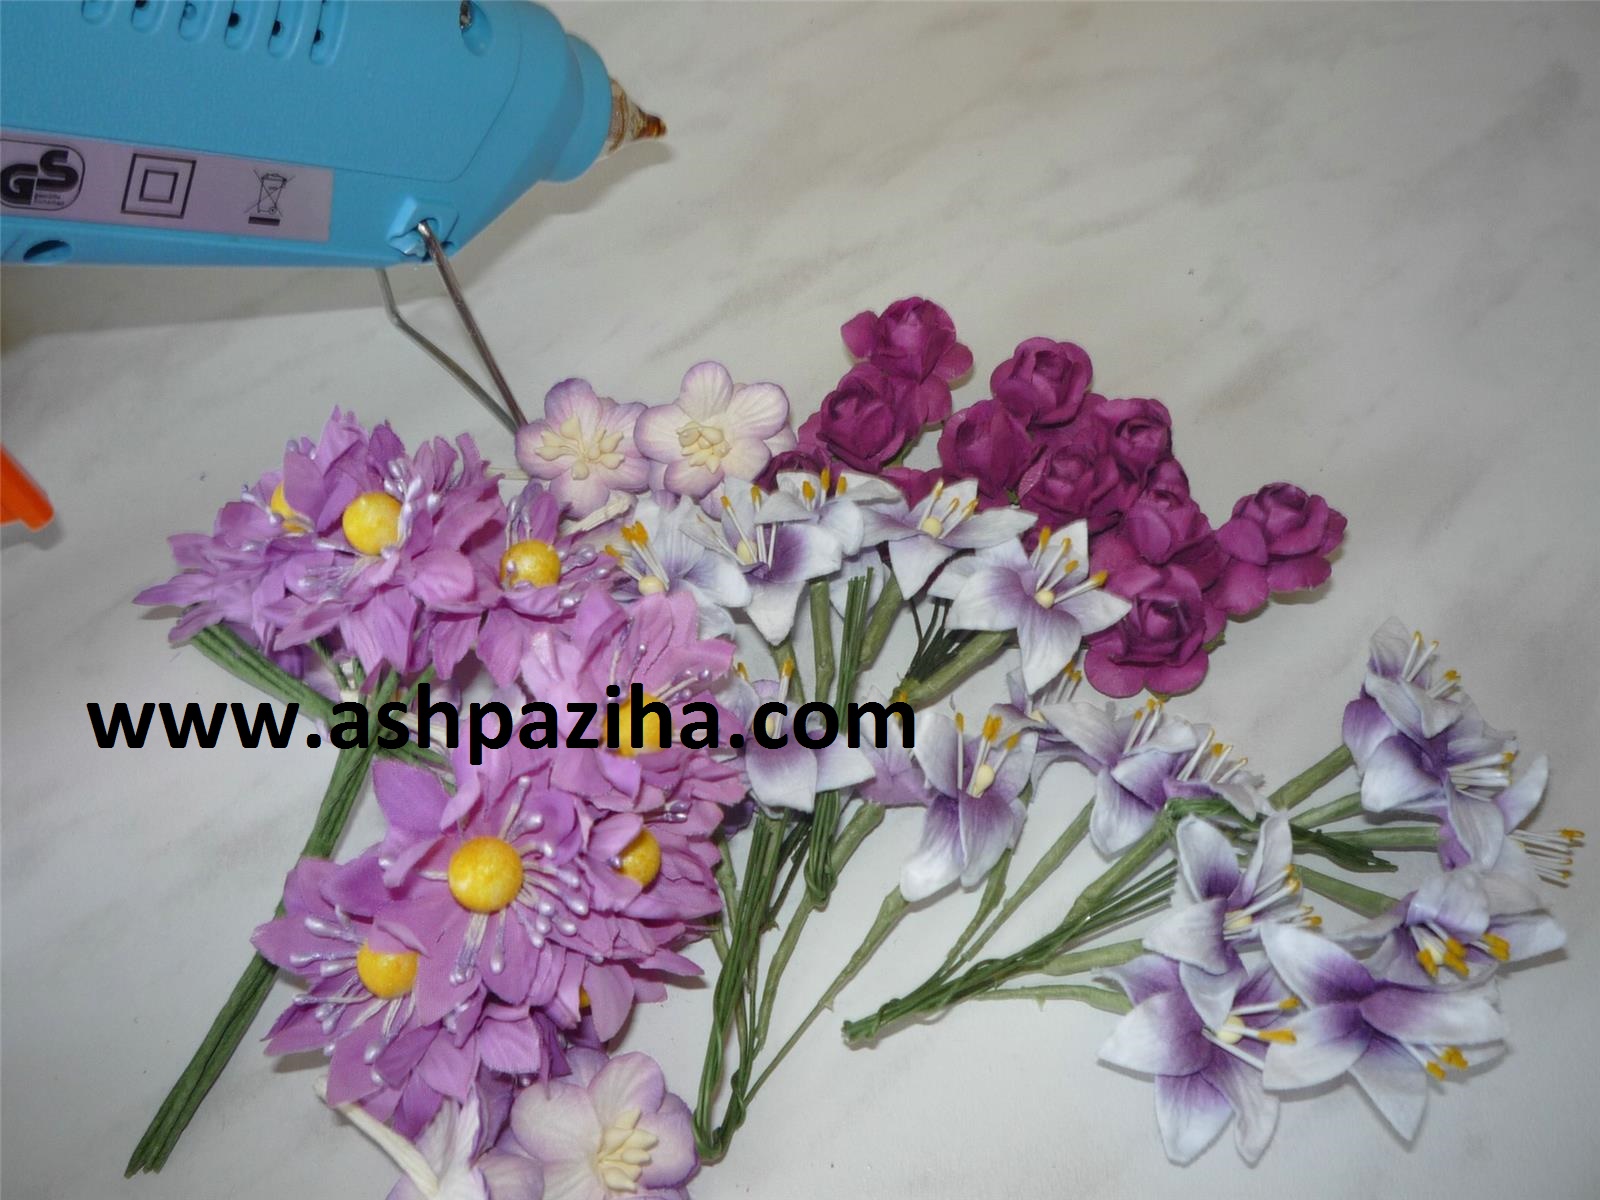 Training - image - flower decoration - cup (5)